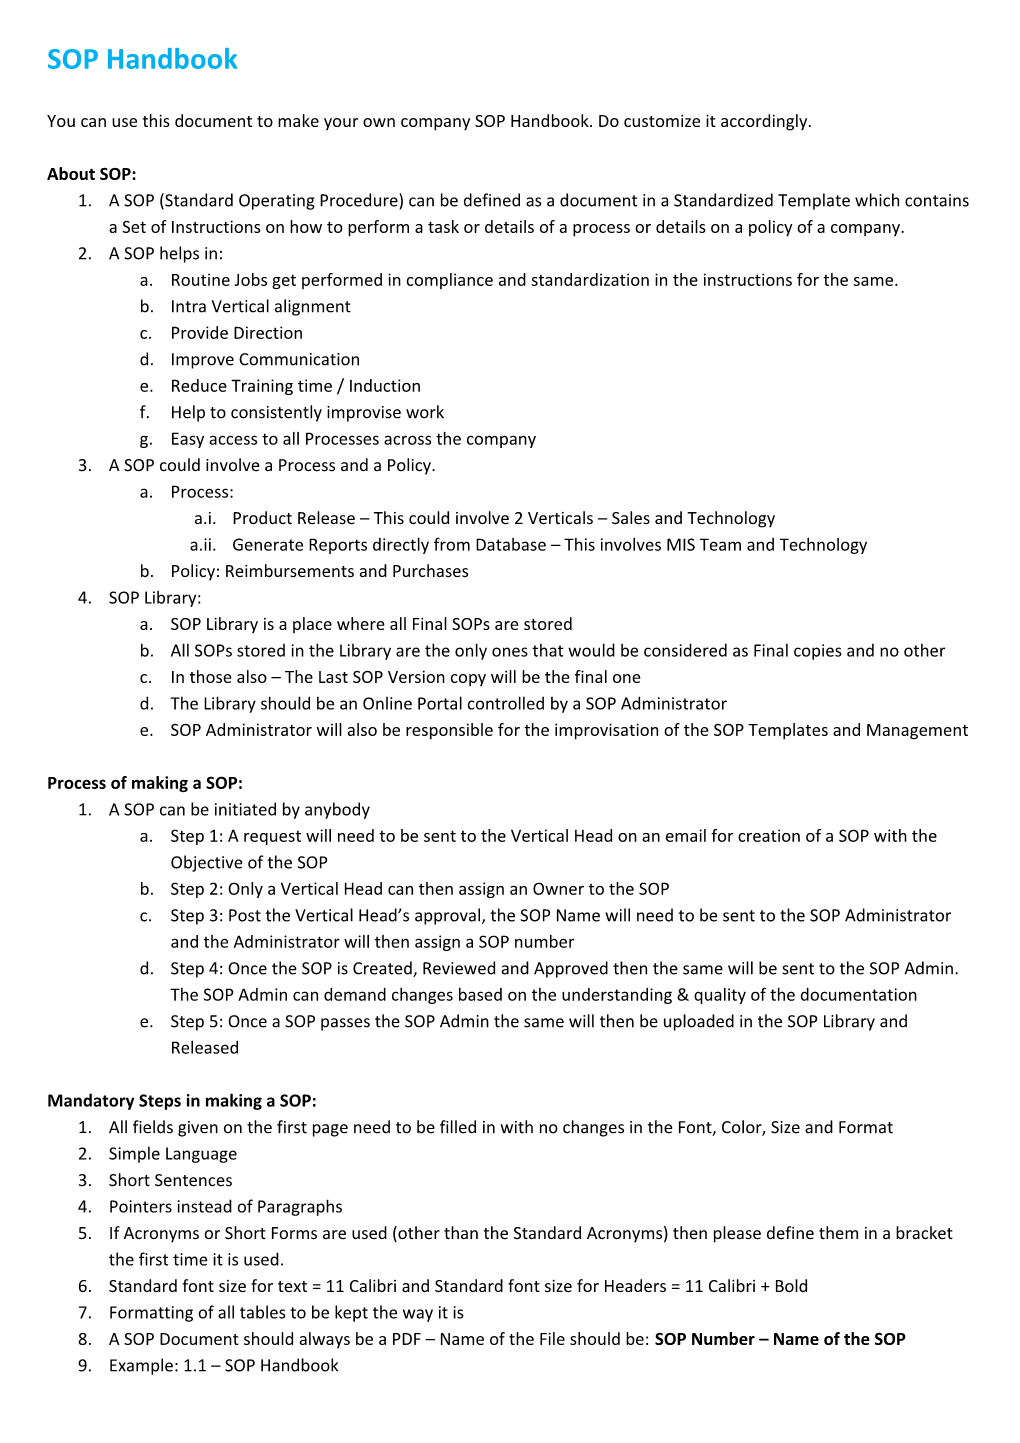 You Can Use This Document to Make Your Own Company SOP Handbook. Do Customize It Accordingly